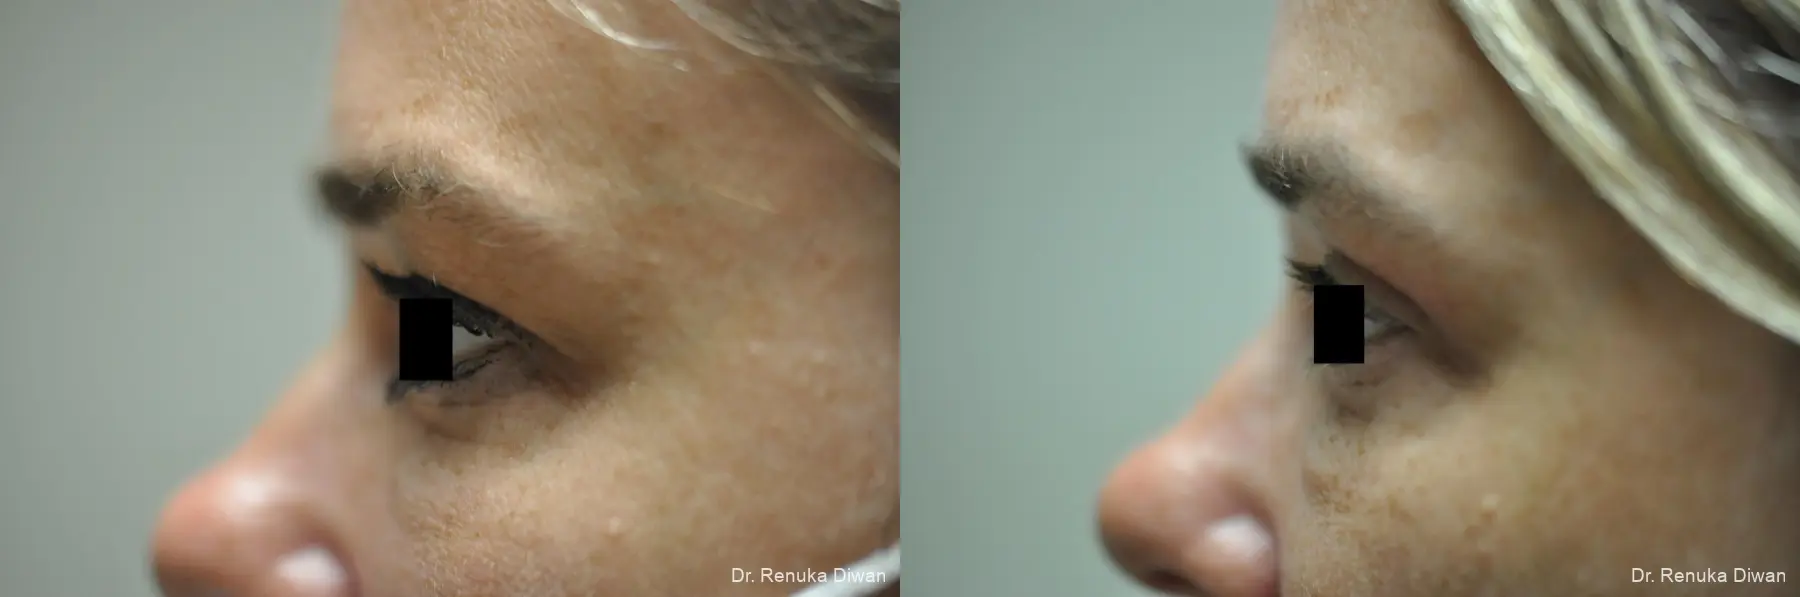 Blepharoplasty: Patient 3 - Before and After 2